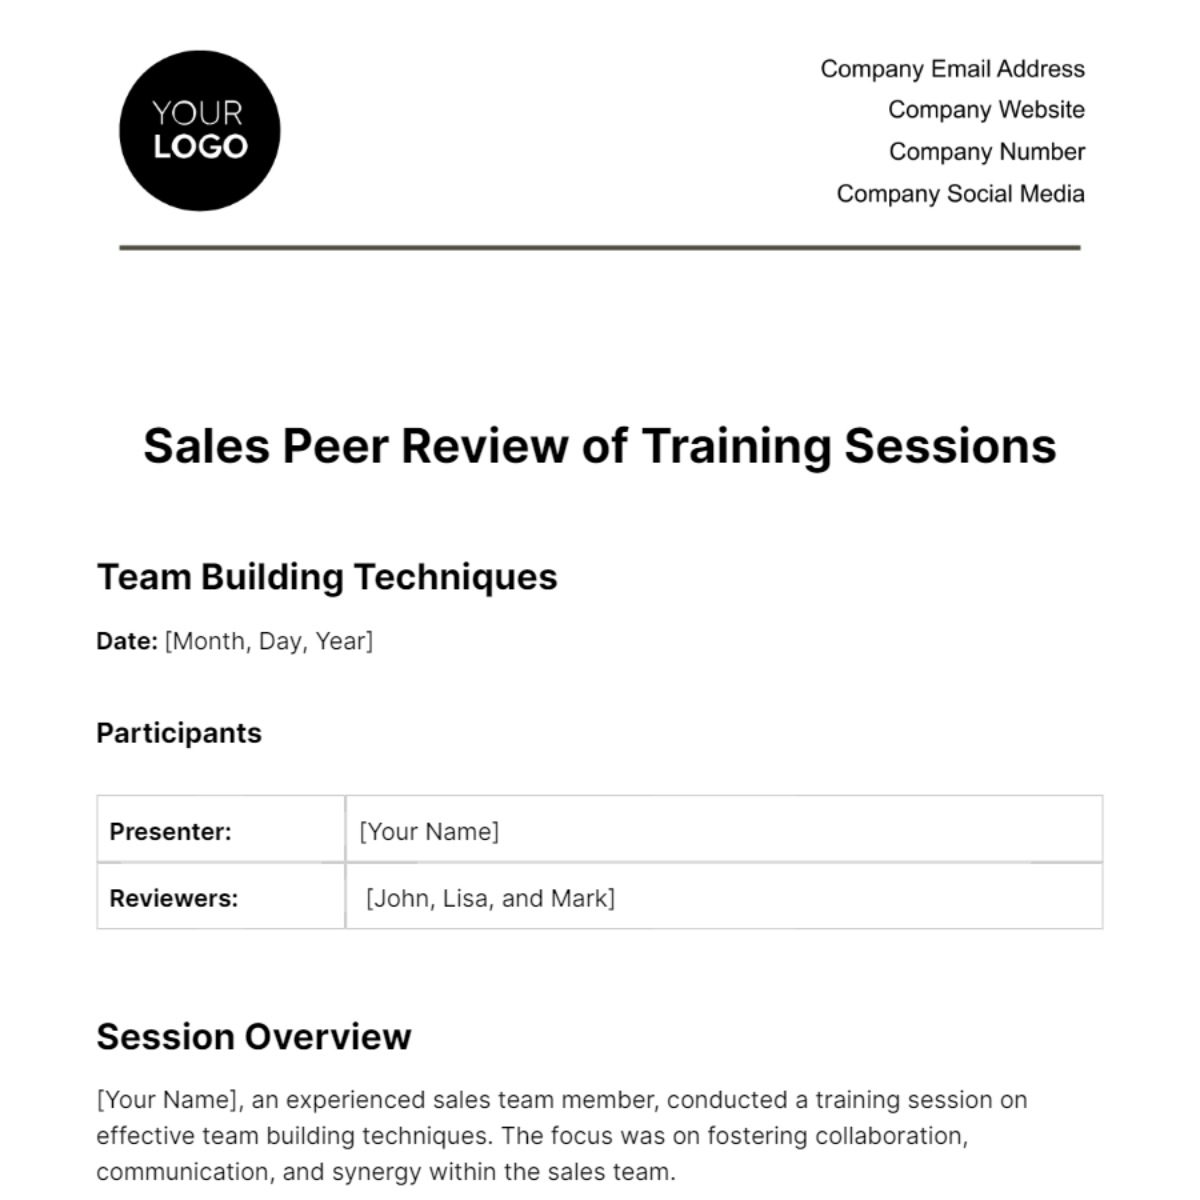 Free Sales Peer Review of Training Sessions Template